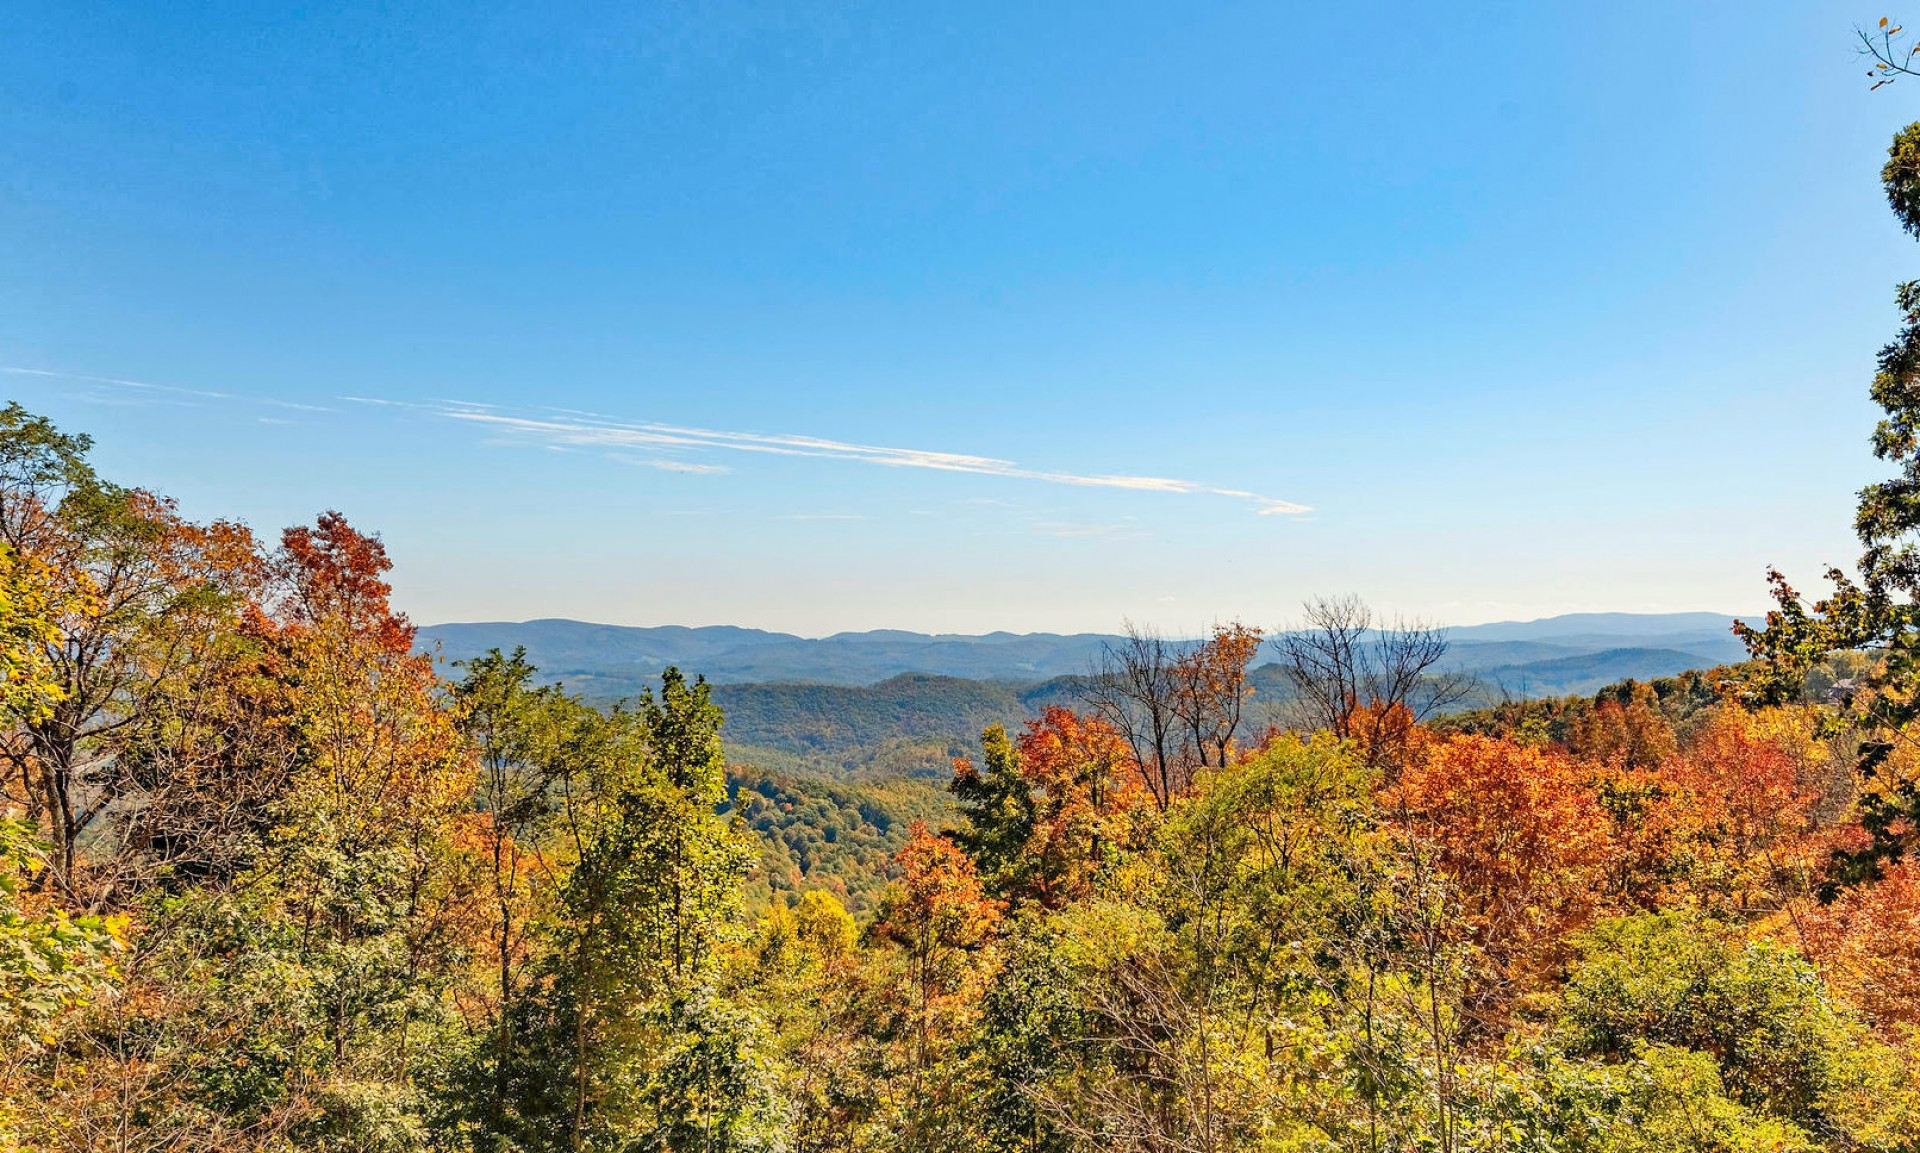 Come live in the tree tops and watch the view out over the Blue Ridge Mountains change by the hour.